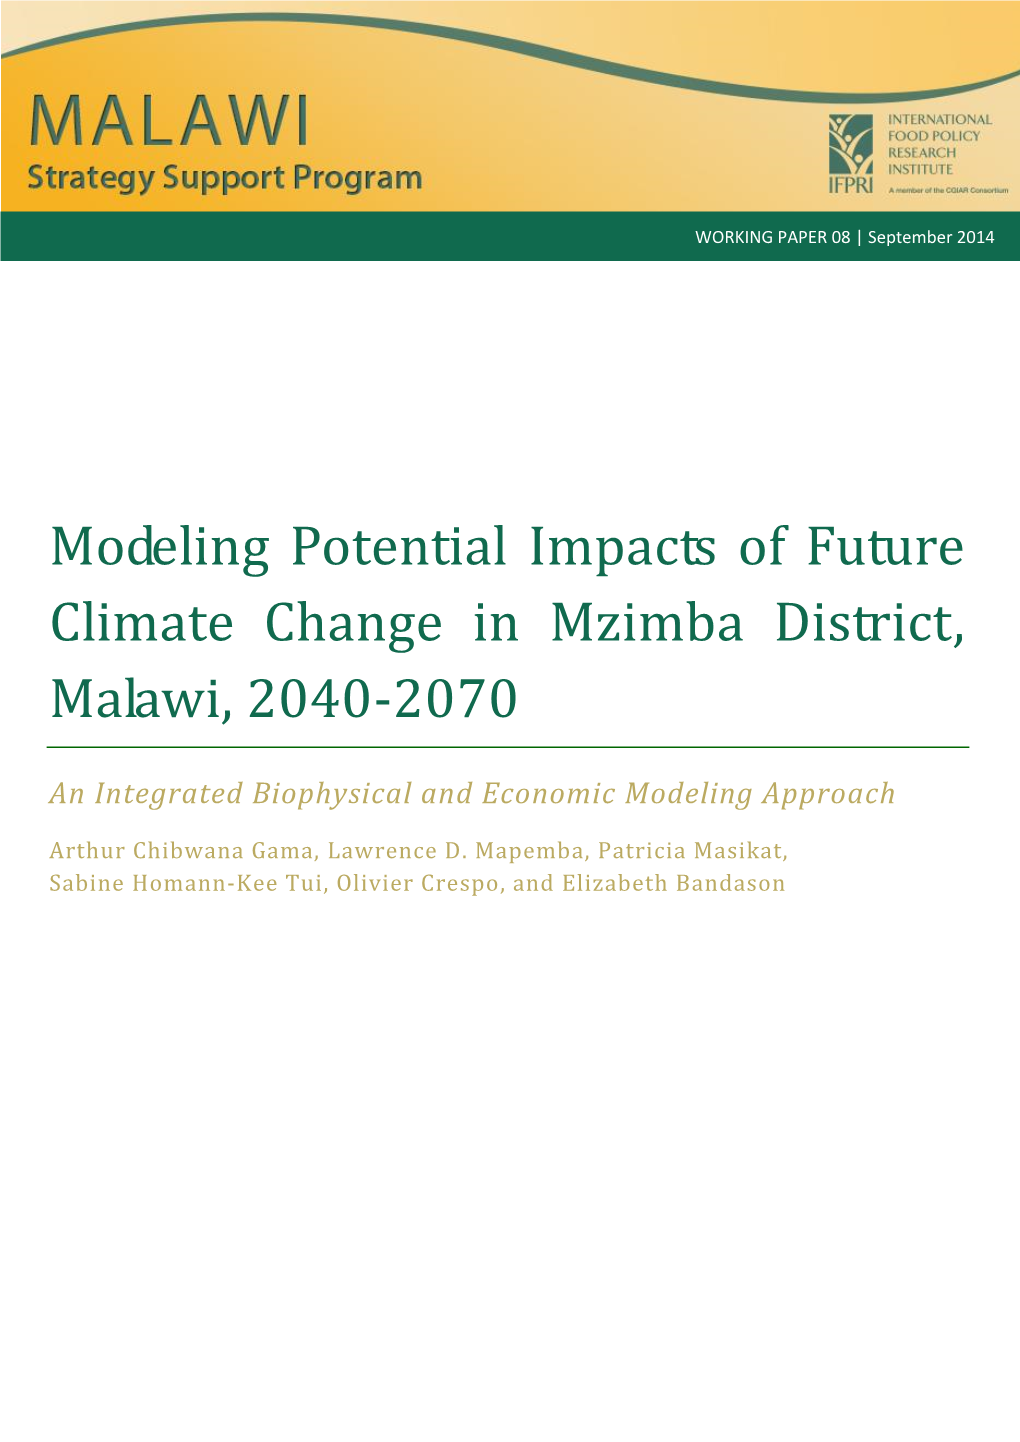 Modeling Potential Impacts of Future Climate Change in Mzimba District, Malawi, 2040-2070